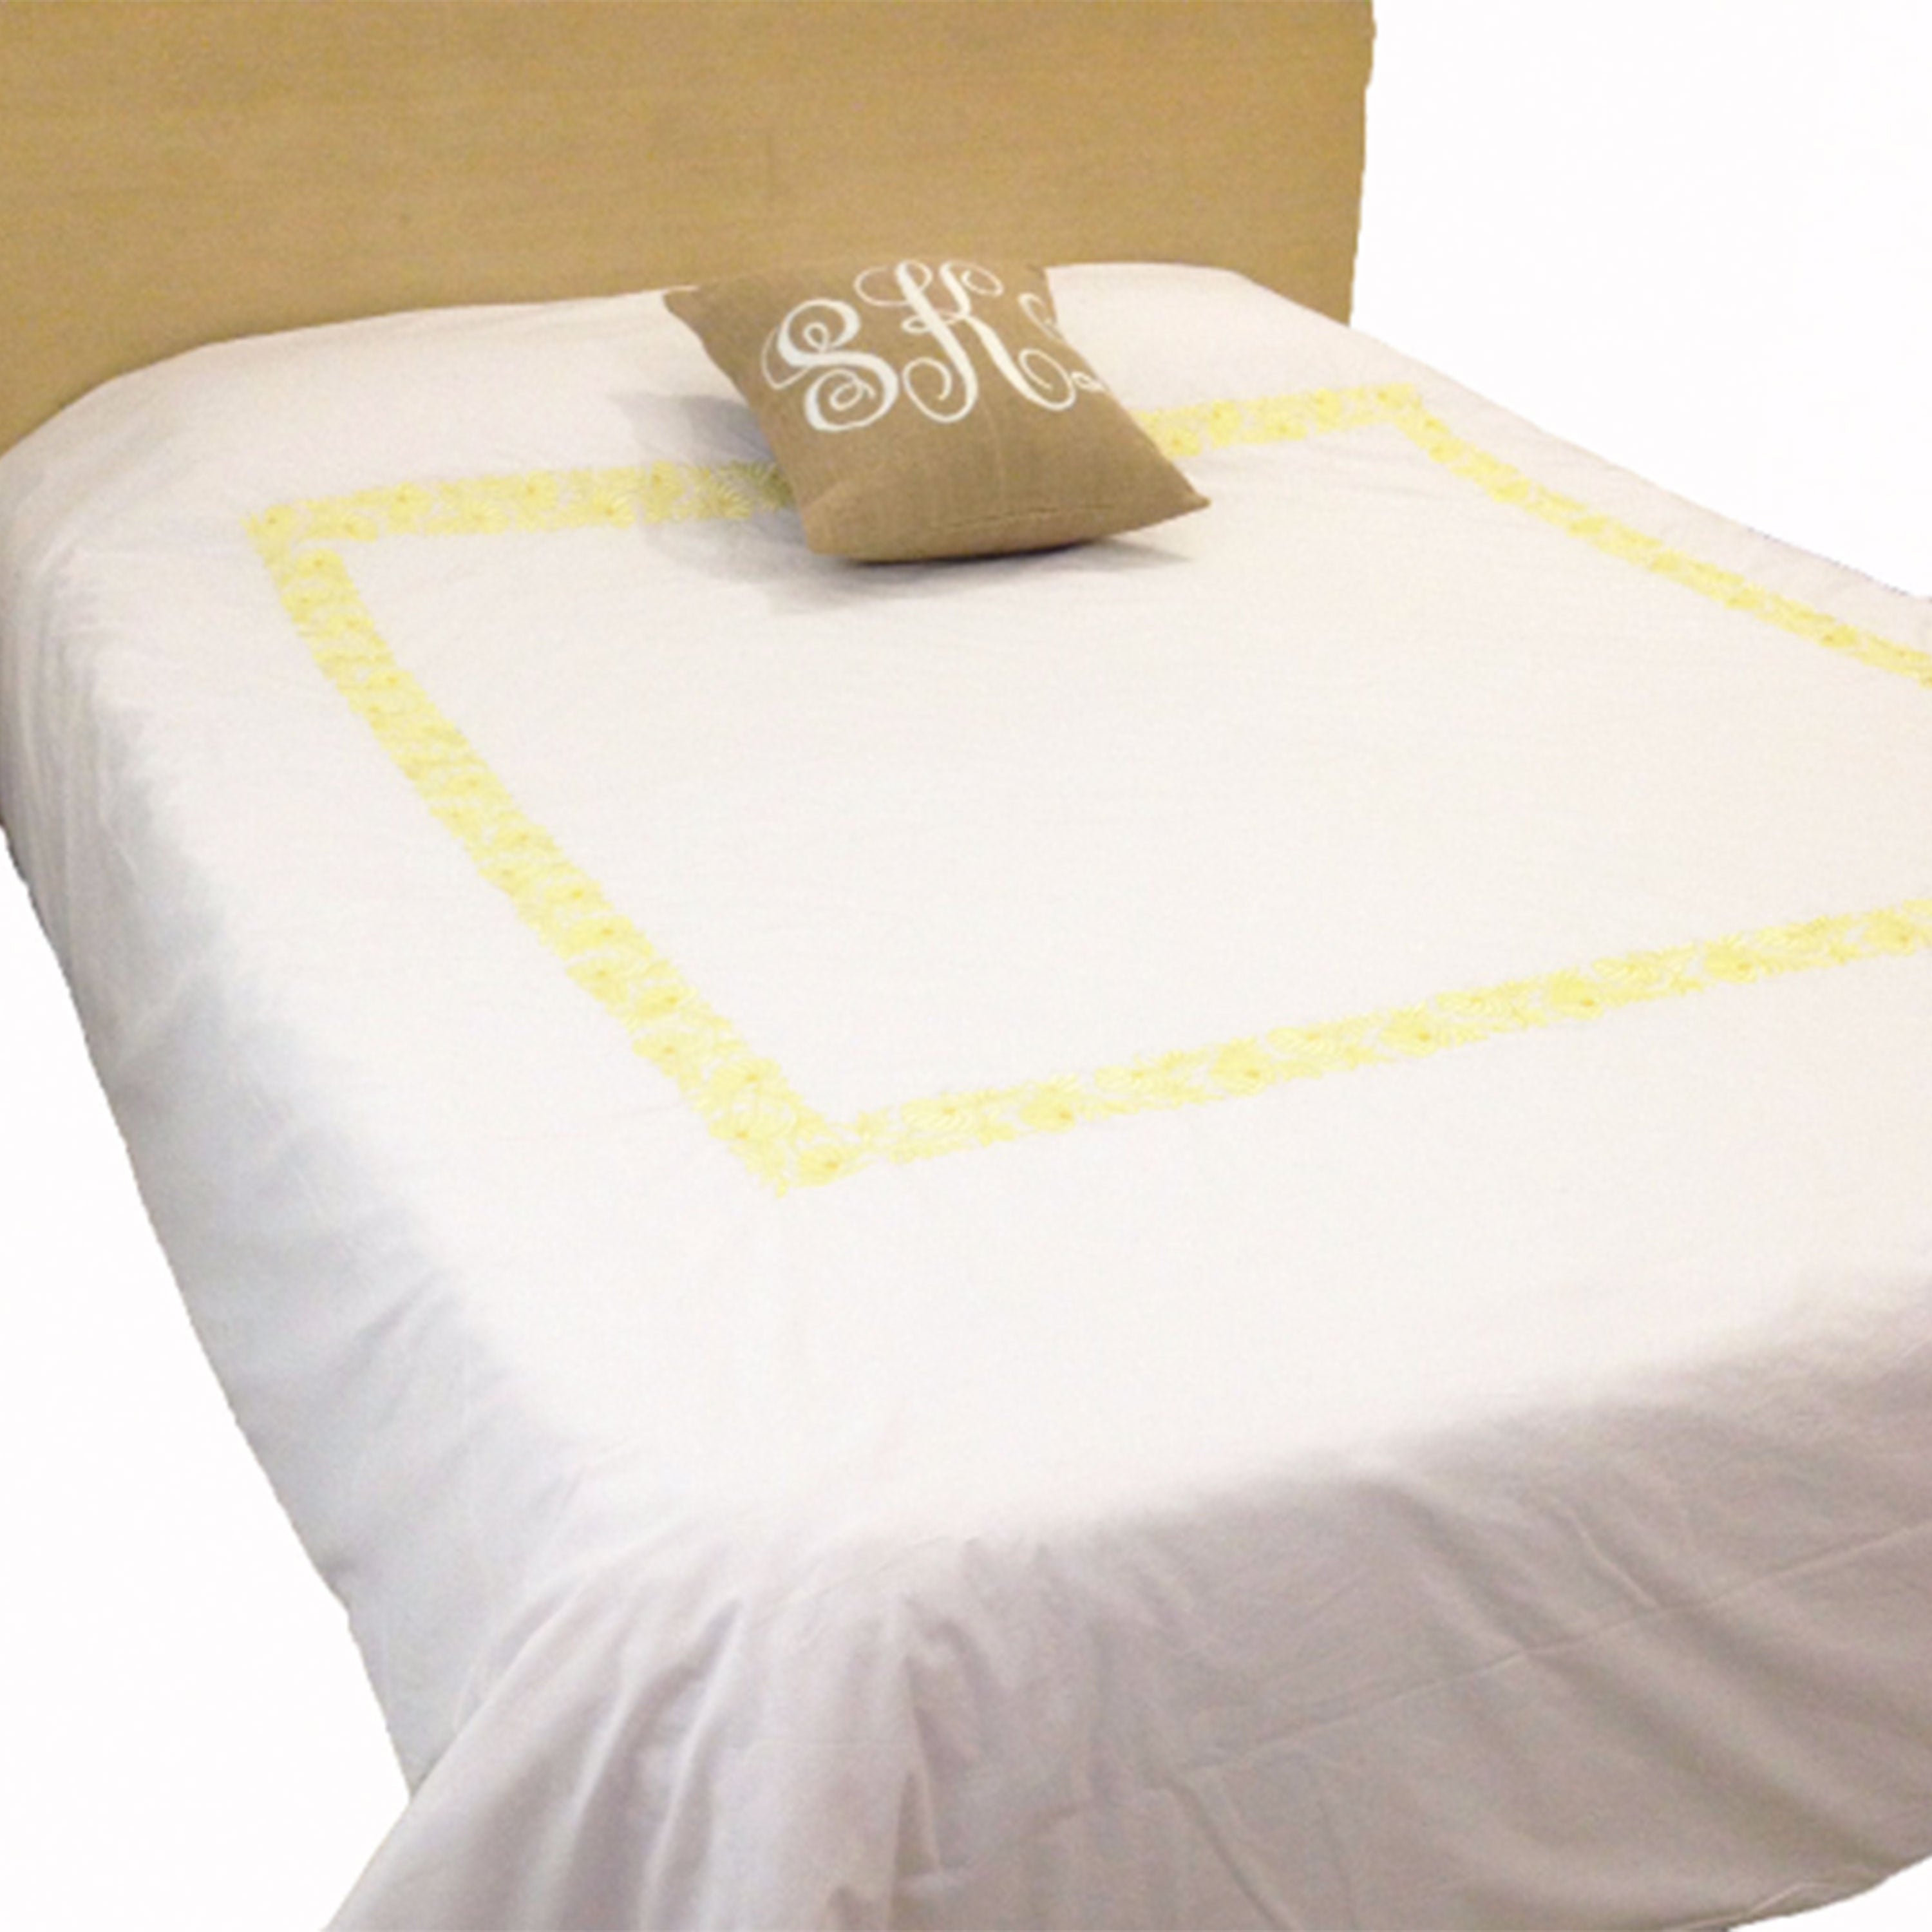 Embroidered Duvet Cover in White Cotton Queen Bedding Wedding Anniversary Housewarming Gifts